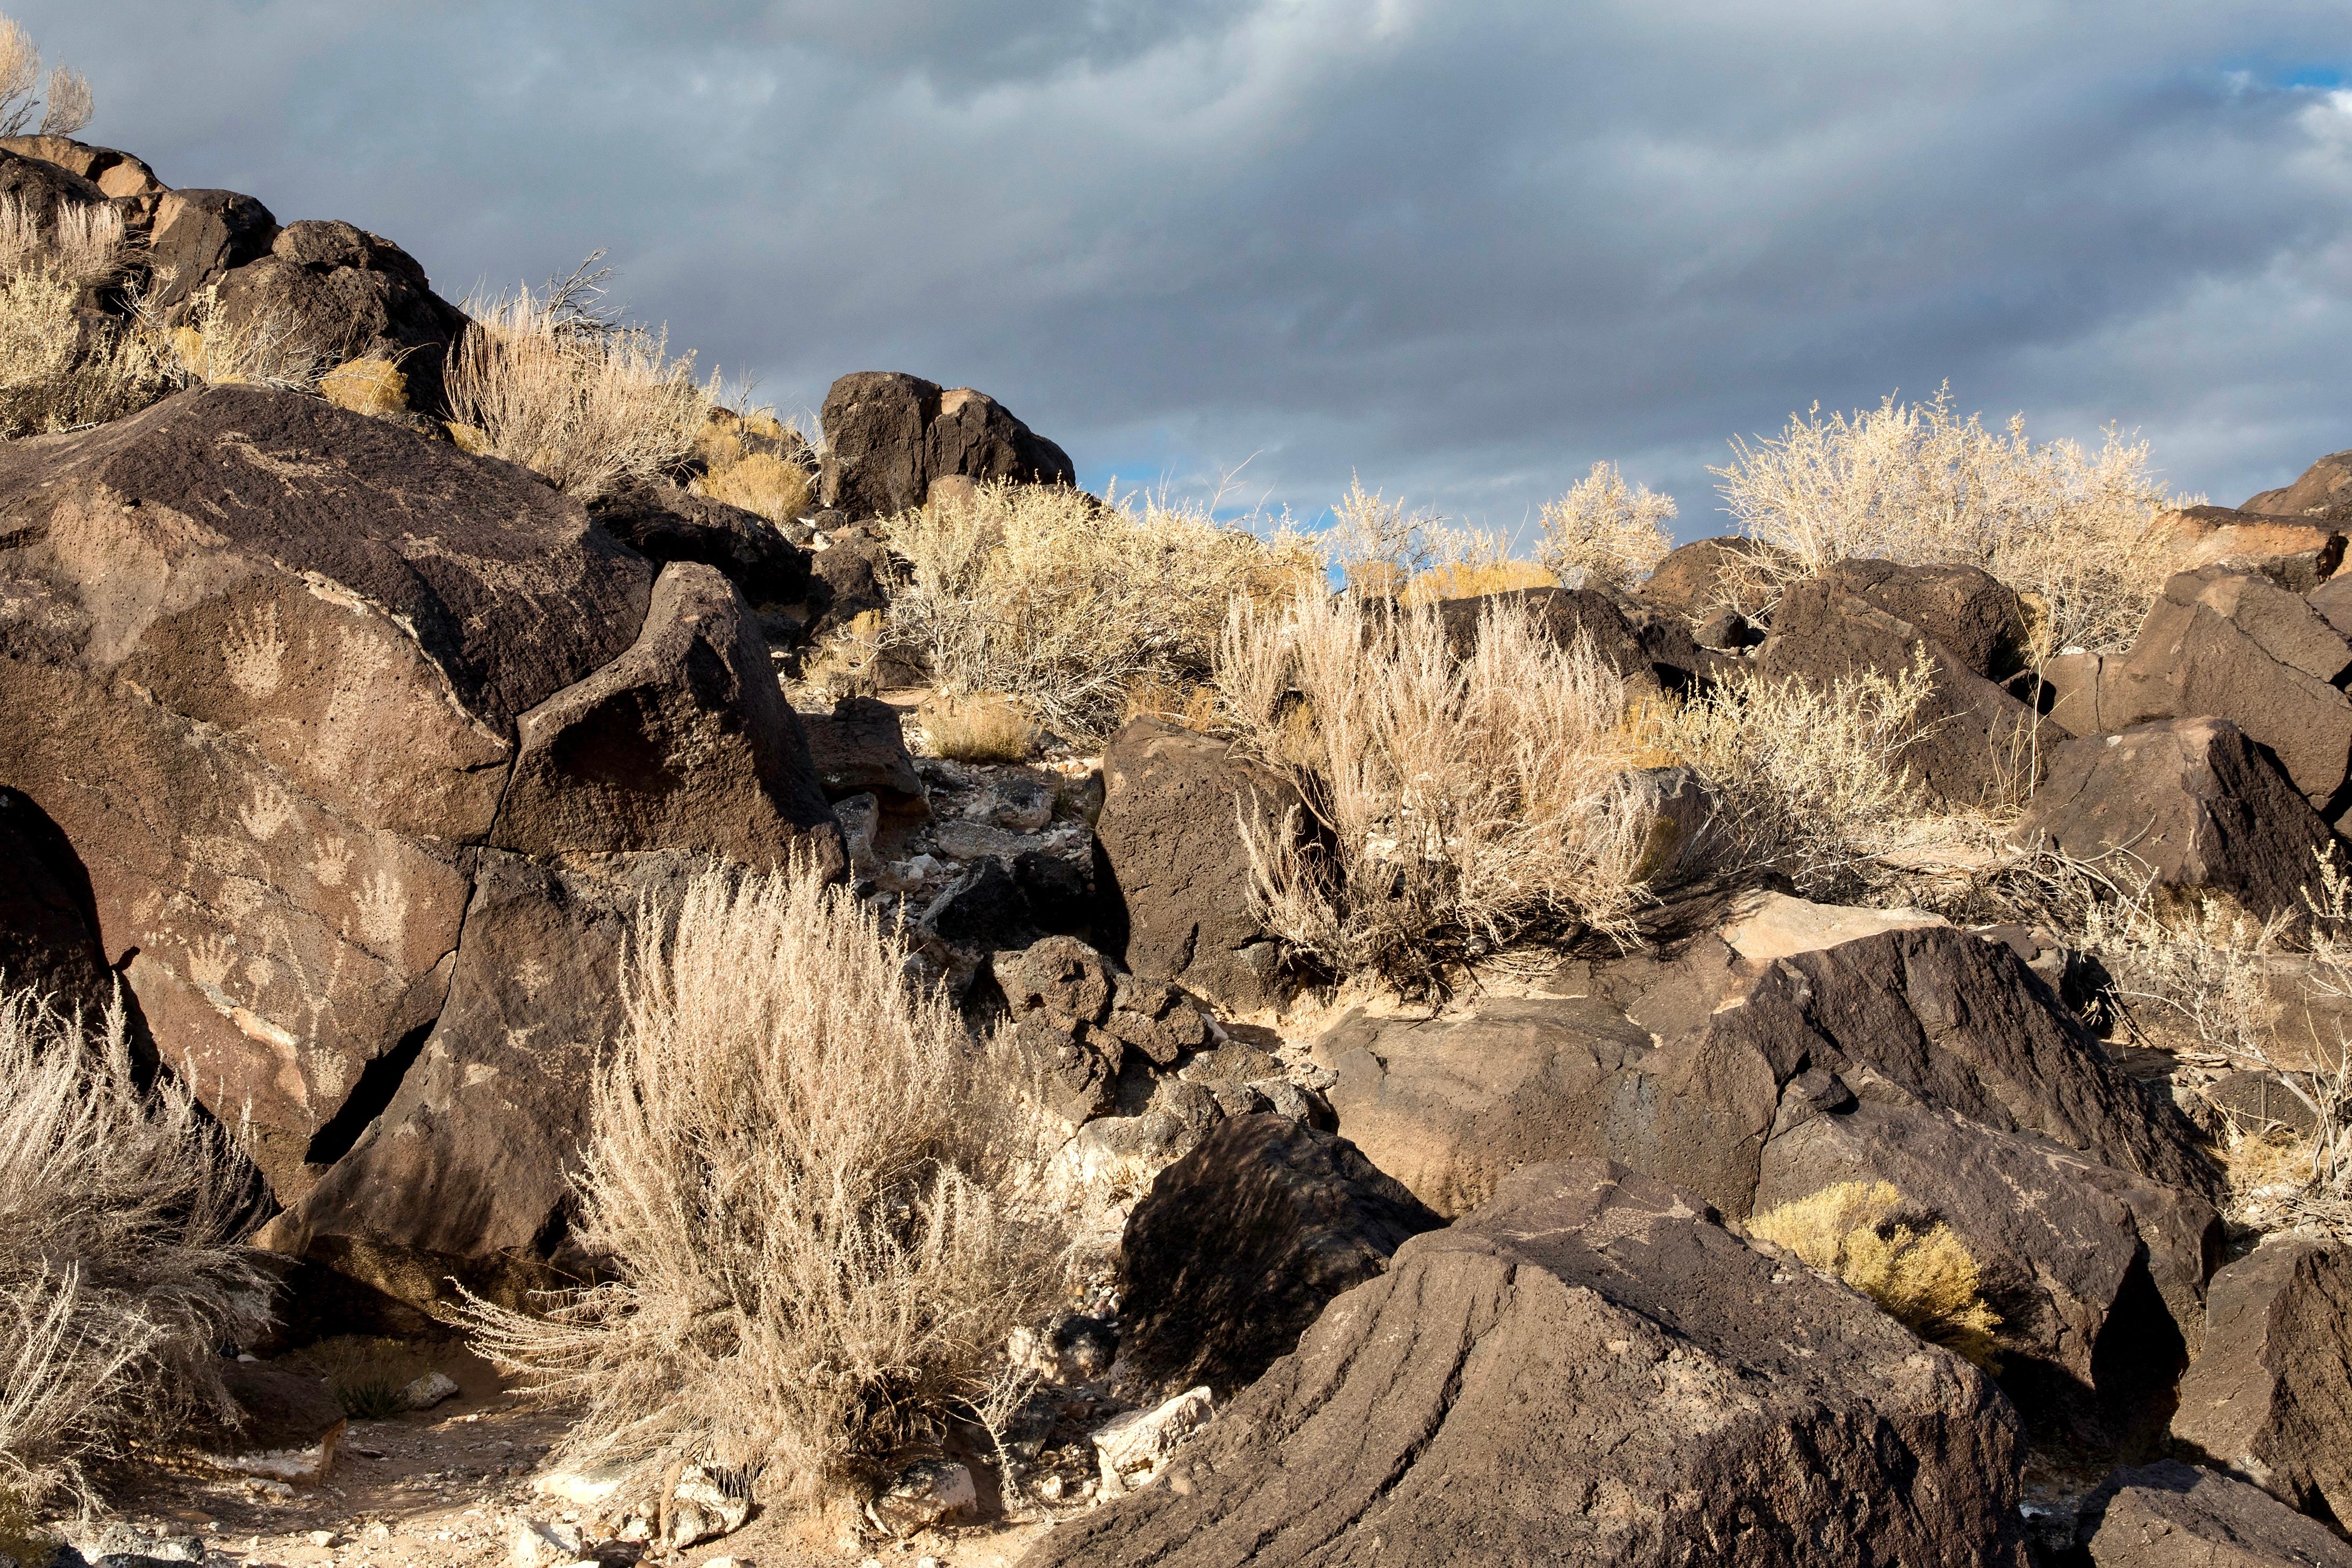 Petroglyphs on dark boulders with a cloudy sky.